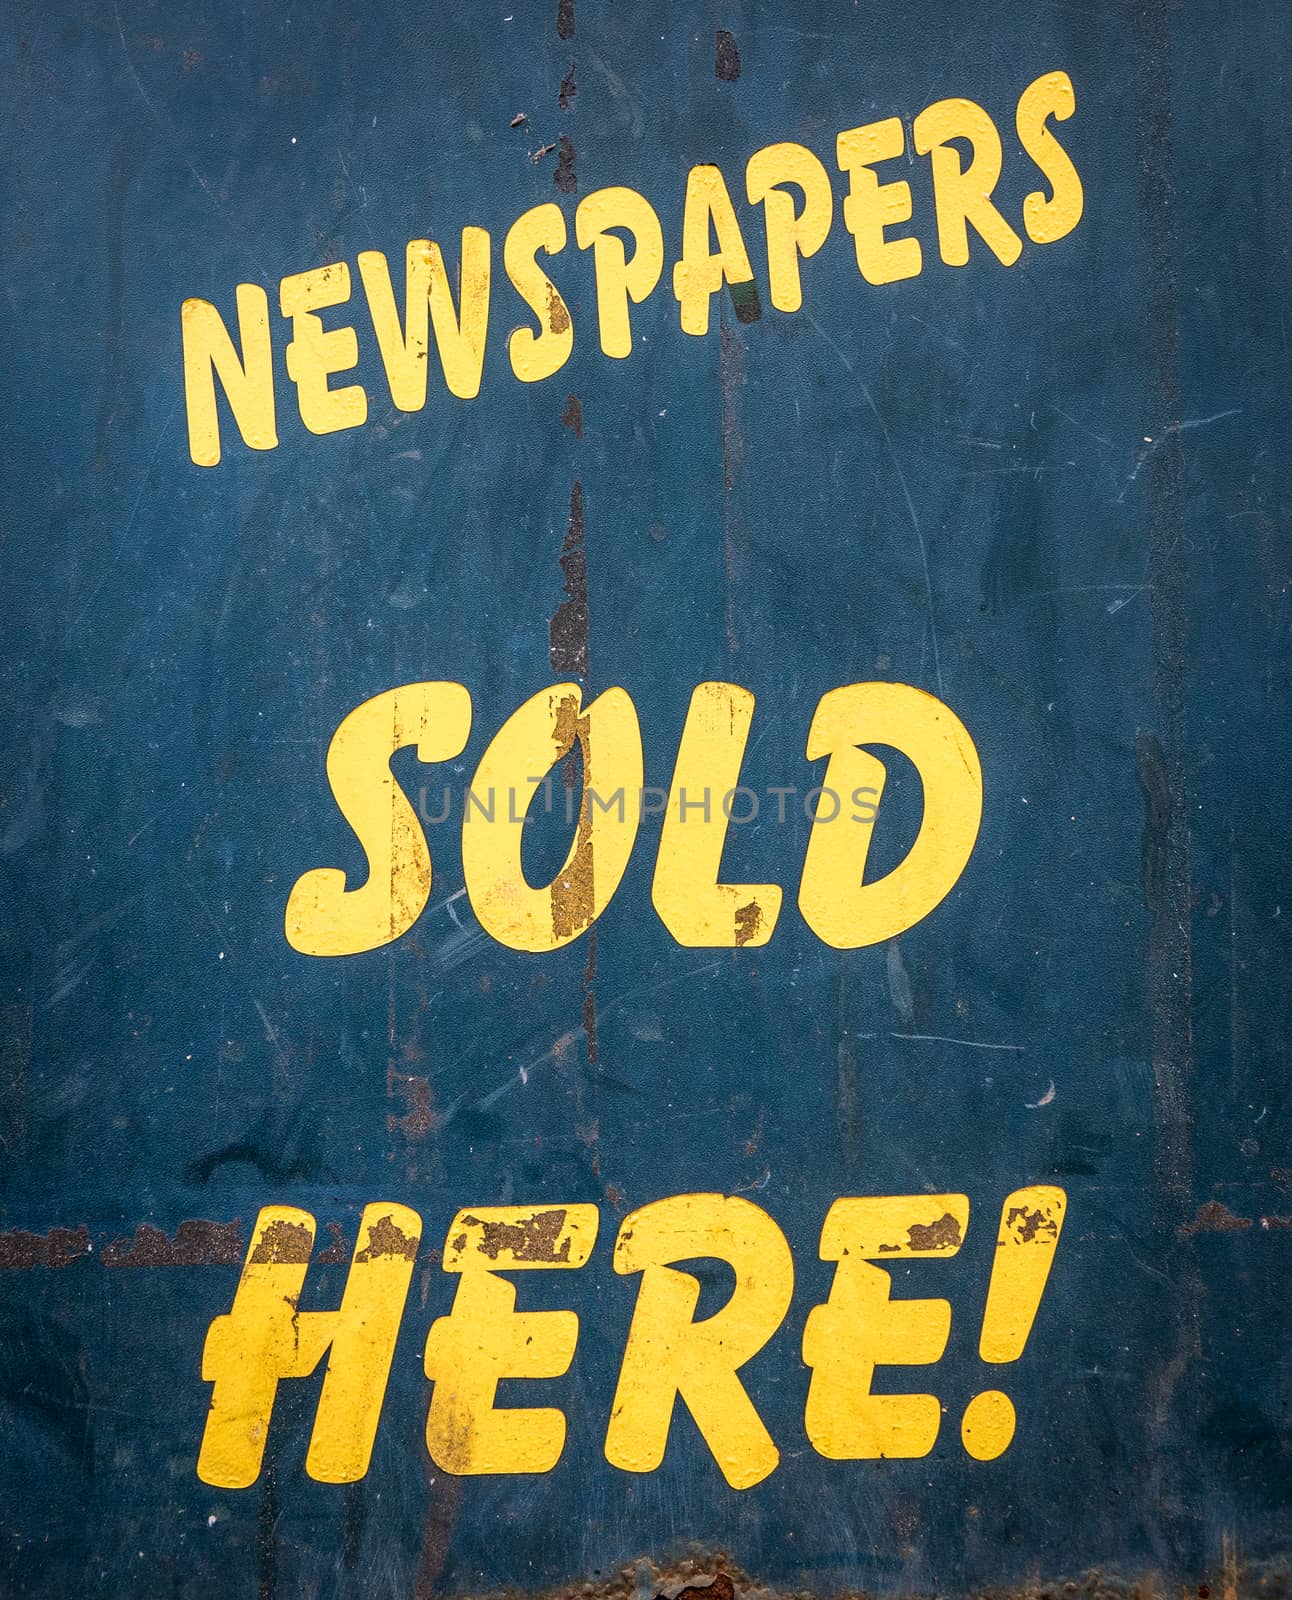 Newspapers Sold Here by mrdoomits